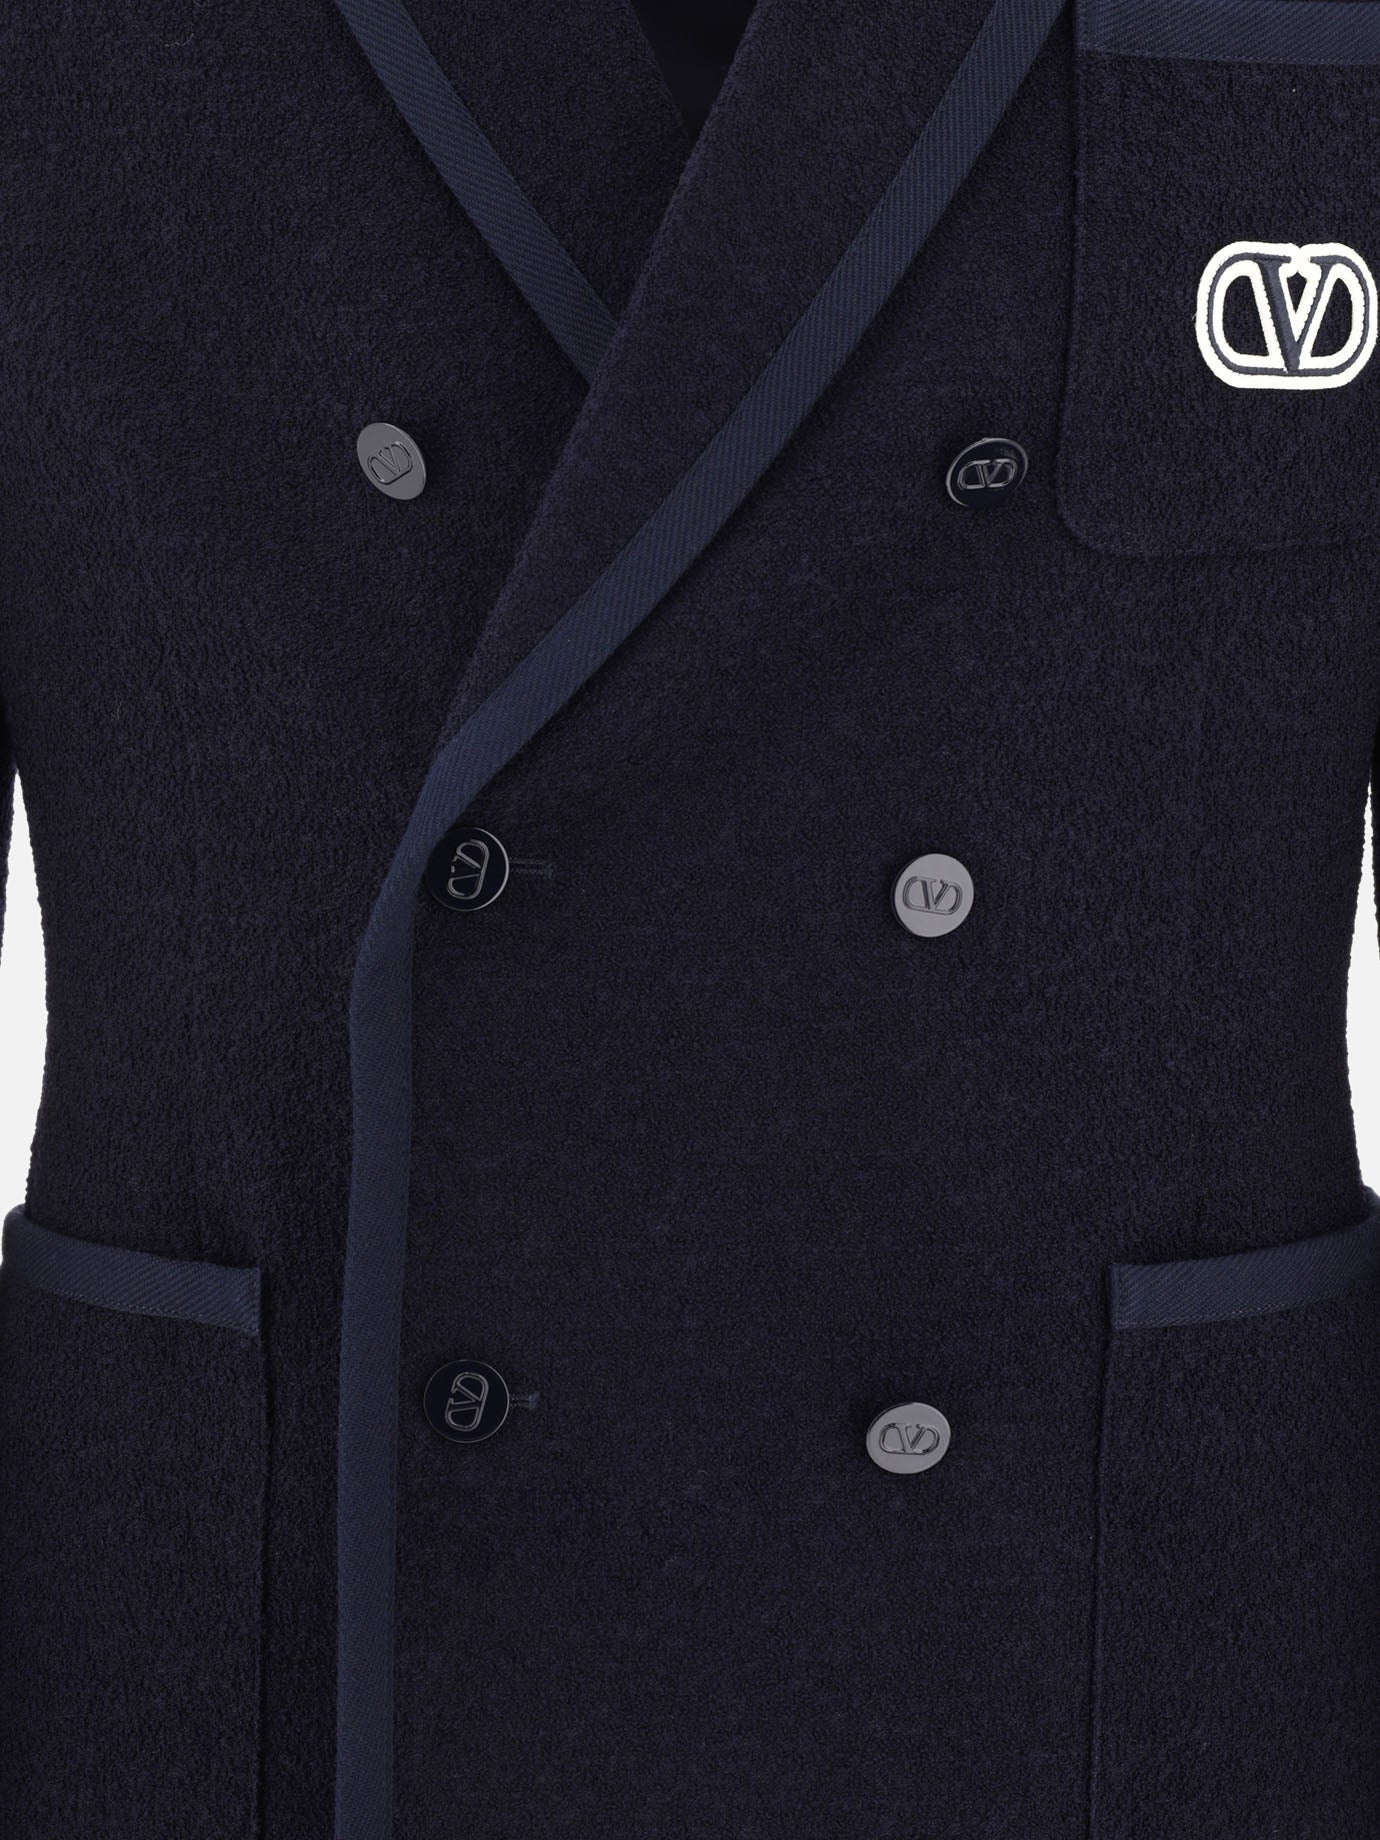 Bouclé wool blazer with VLogo Signature embroidery